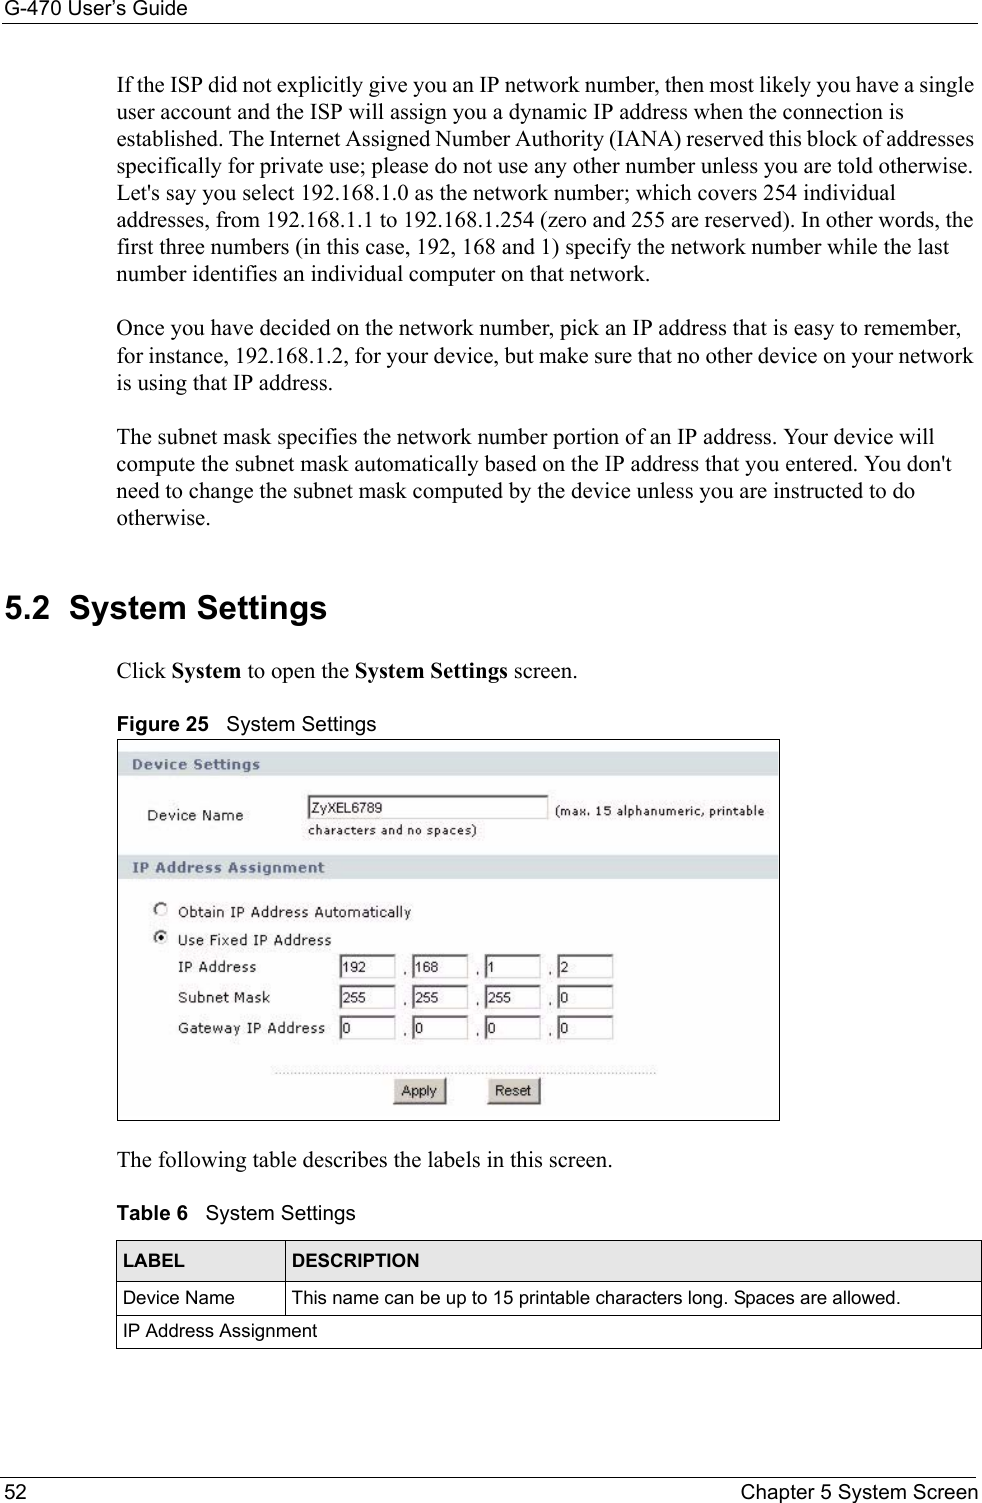 G-470 User’s Guide52 Chapter 5 System ScreenIf the ISP did not explicitly give you an IP network number, then most likely you have a single user account and the ISP will assign you a dynamic IP address when the connection is established. The Internet Assigned Number Authority (IANA) reserved this block of addresses specifically for private use; please do not use any other number unless you are told otherwise. Let&apos;s say you select 192.168.1.0 as the network number; which covers 254 individual addresses, from 192.168.1.1 to 192.168.1.254 (zero and 255 are reserved). In other words, the first three numbers (in this case, 192, 168 and 1) specify the network number while the last number identifies an individual computer on that network.Once you have decided on the network number, pick an IP address that is easy to remember, for instance, 192.168.1.2, for your device, but make sure that no other device on your network is using that IP address.The subnet mask specifies the network number portion of an IP address. Your device will compute the subnet mask automatically based on the IP address that you entered. You don&apos;t need to change the subnet mask computed by the device unless you are instructed to do otherwise.5.2  System Settings Click System to open the System Settings screen.Figure 25   System SettingsThe following table describes the labels in this screen. Table 6   System SettingsLABEL DESCRIPTIONDevice Name This name can be up to 15 printable characters long. Spaces are allowed.IP Address Assignment